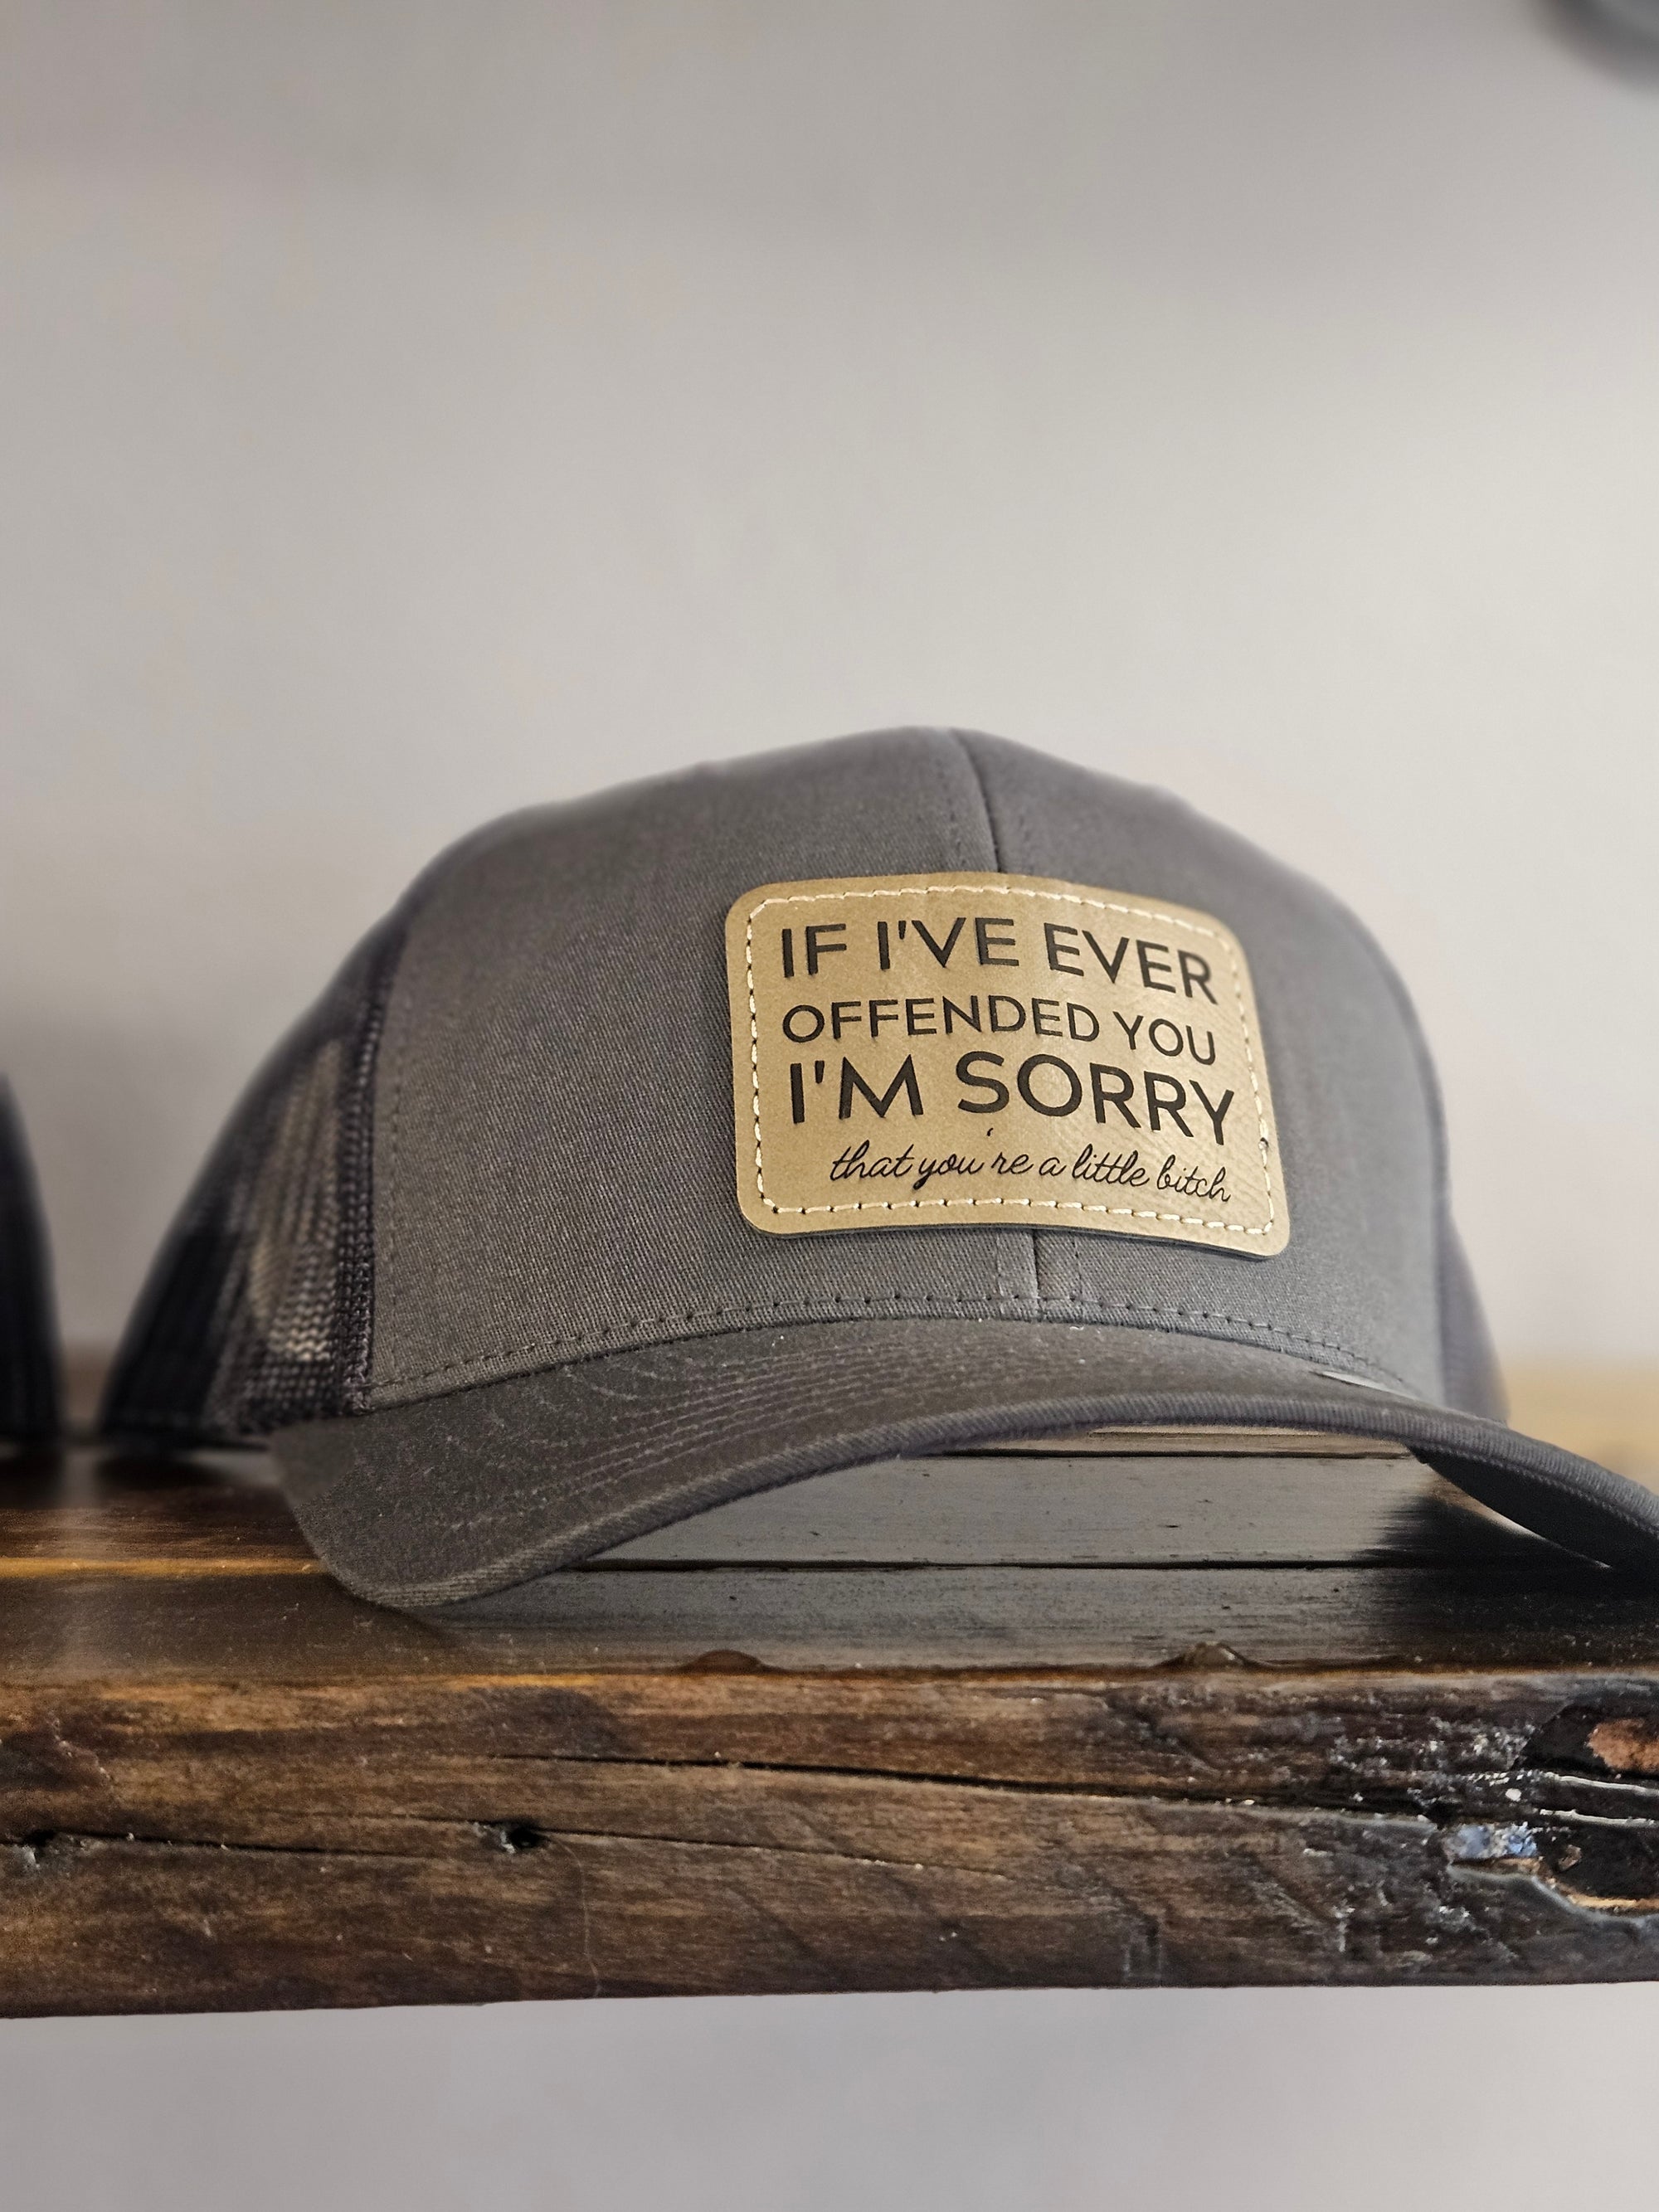 I'm sorry if I offended you Hat